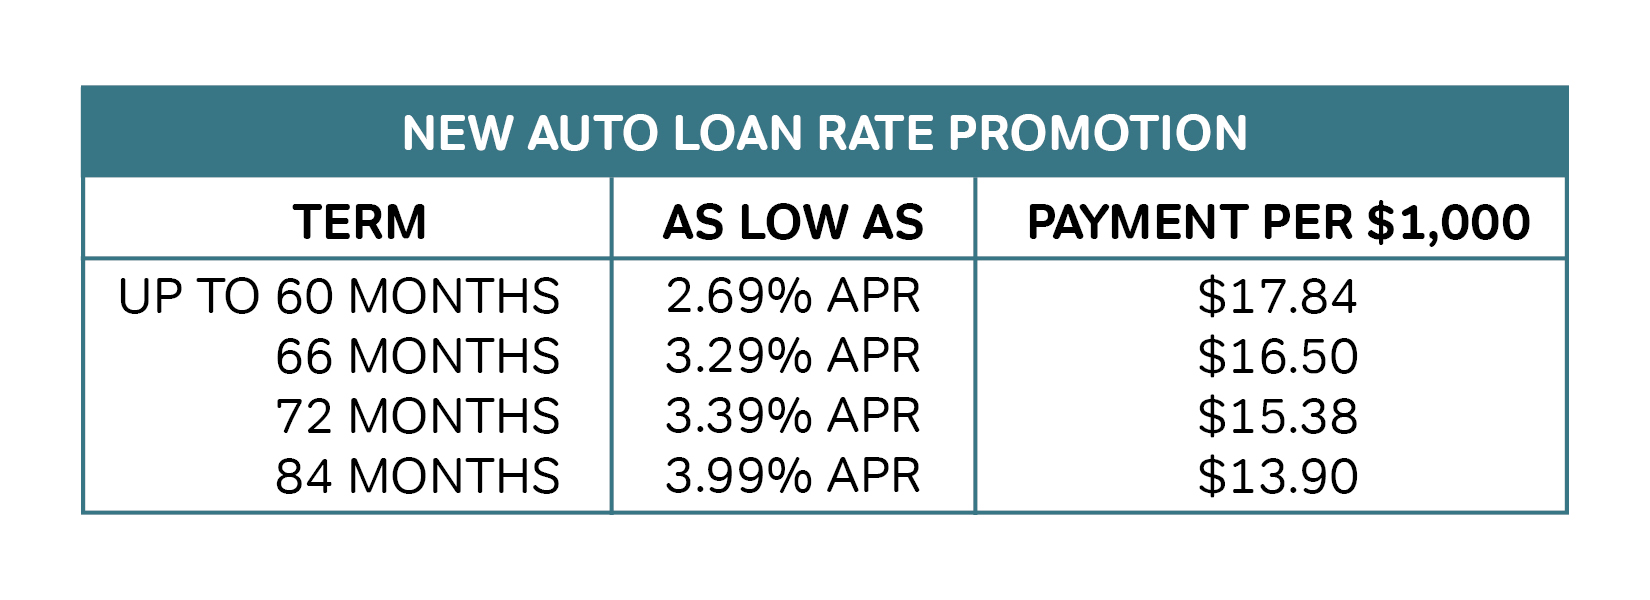 New Auto Loan Rate Promotion - Members First Credit Union